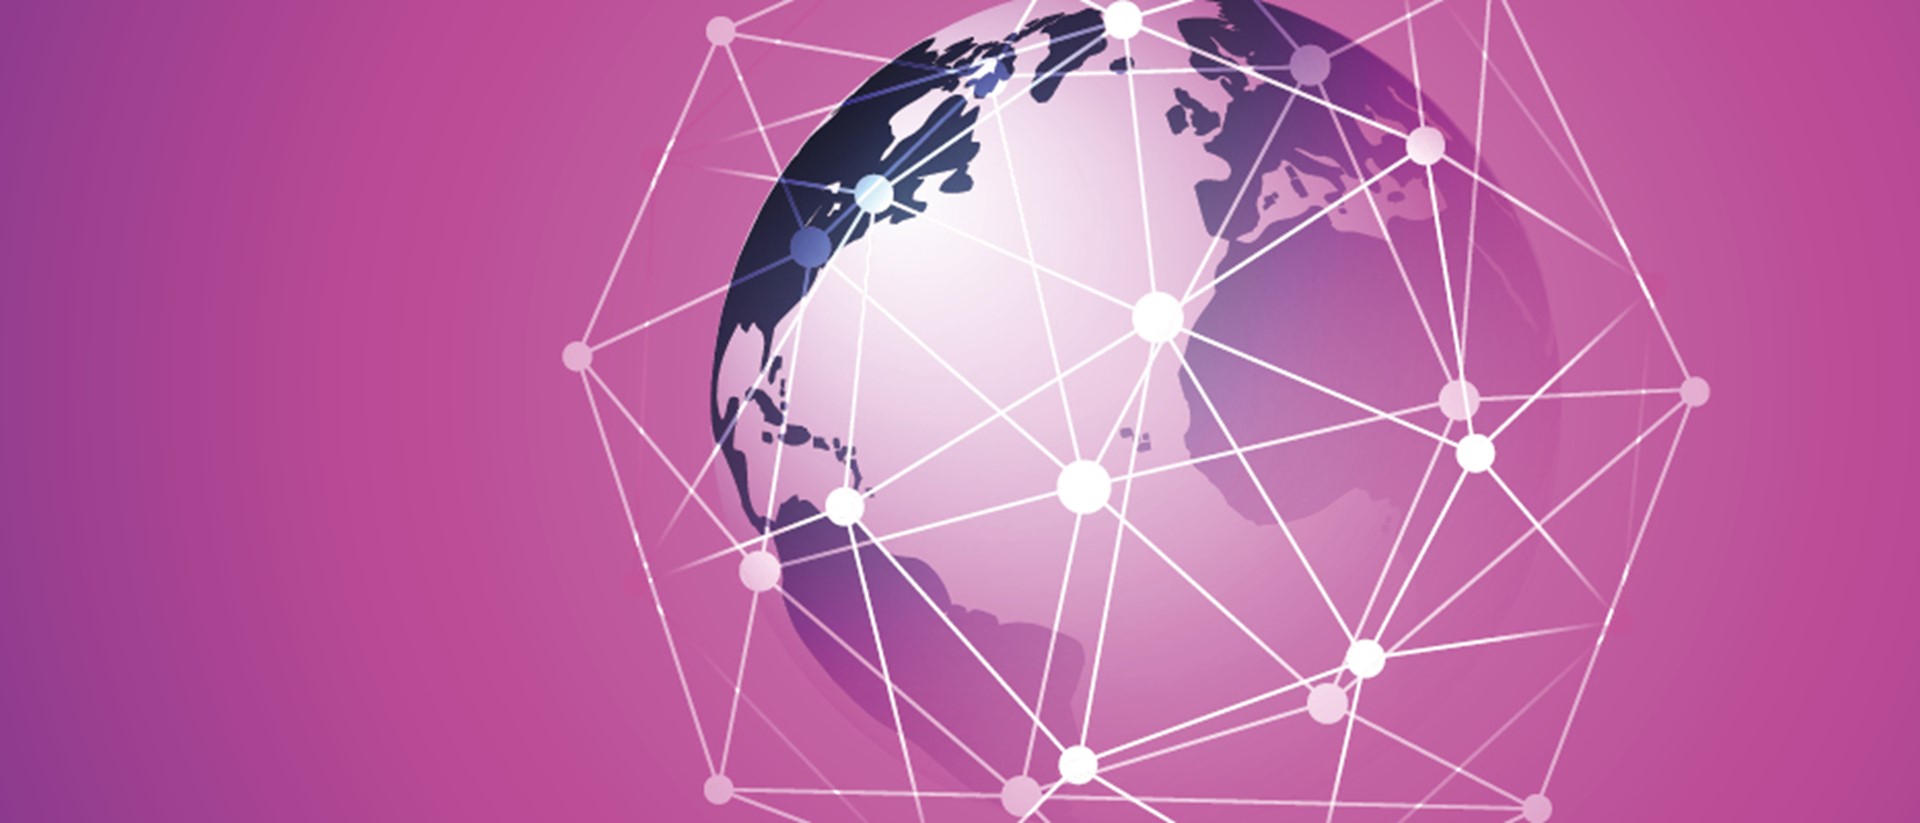 Image of the world with dots and wires wrapped around it on a pink background